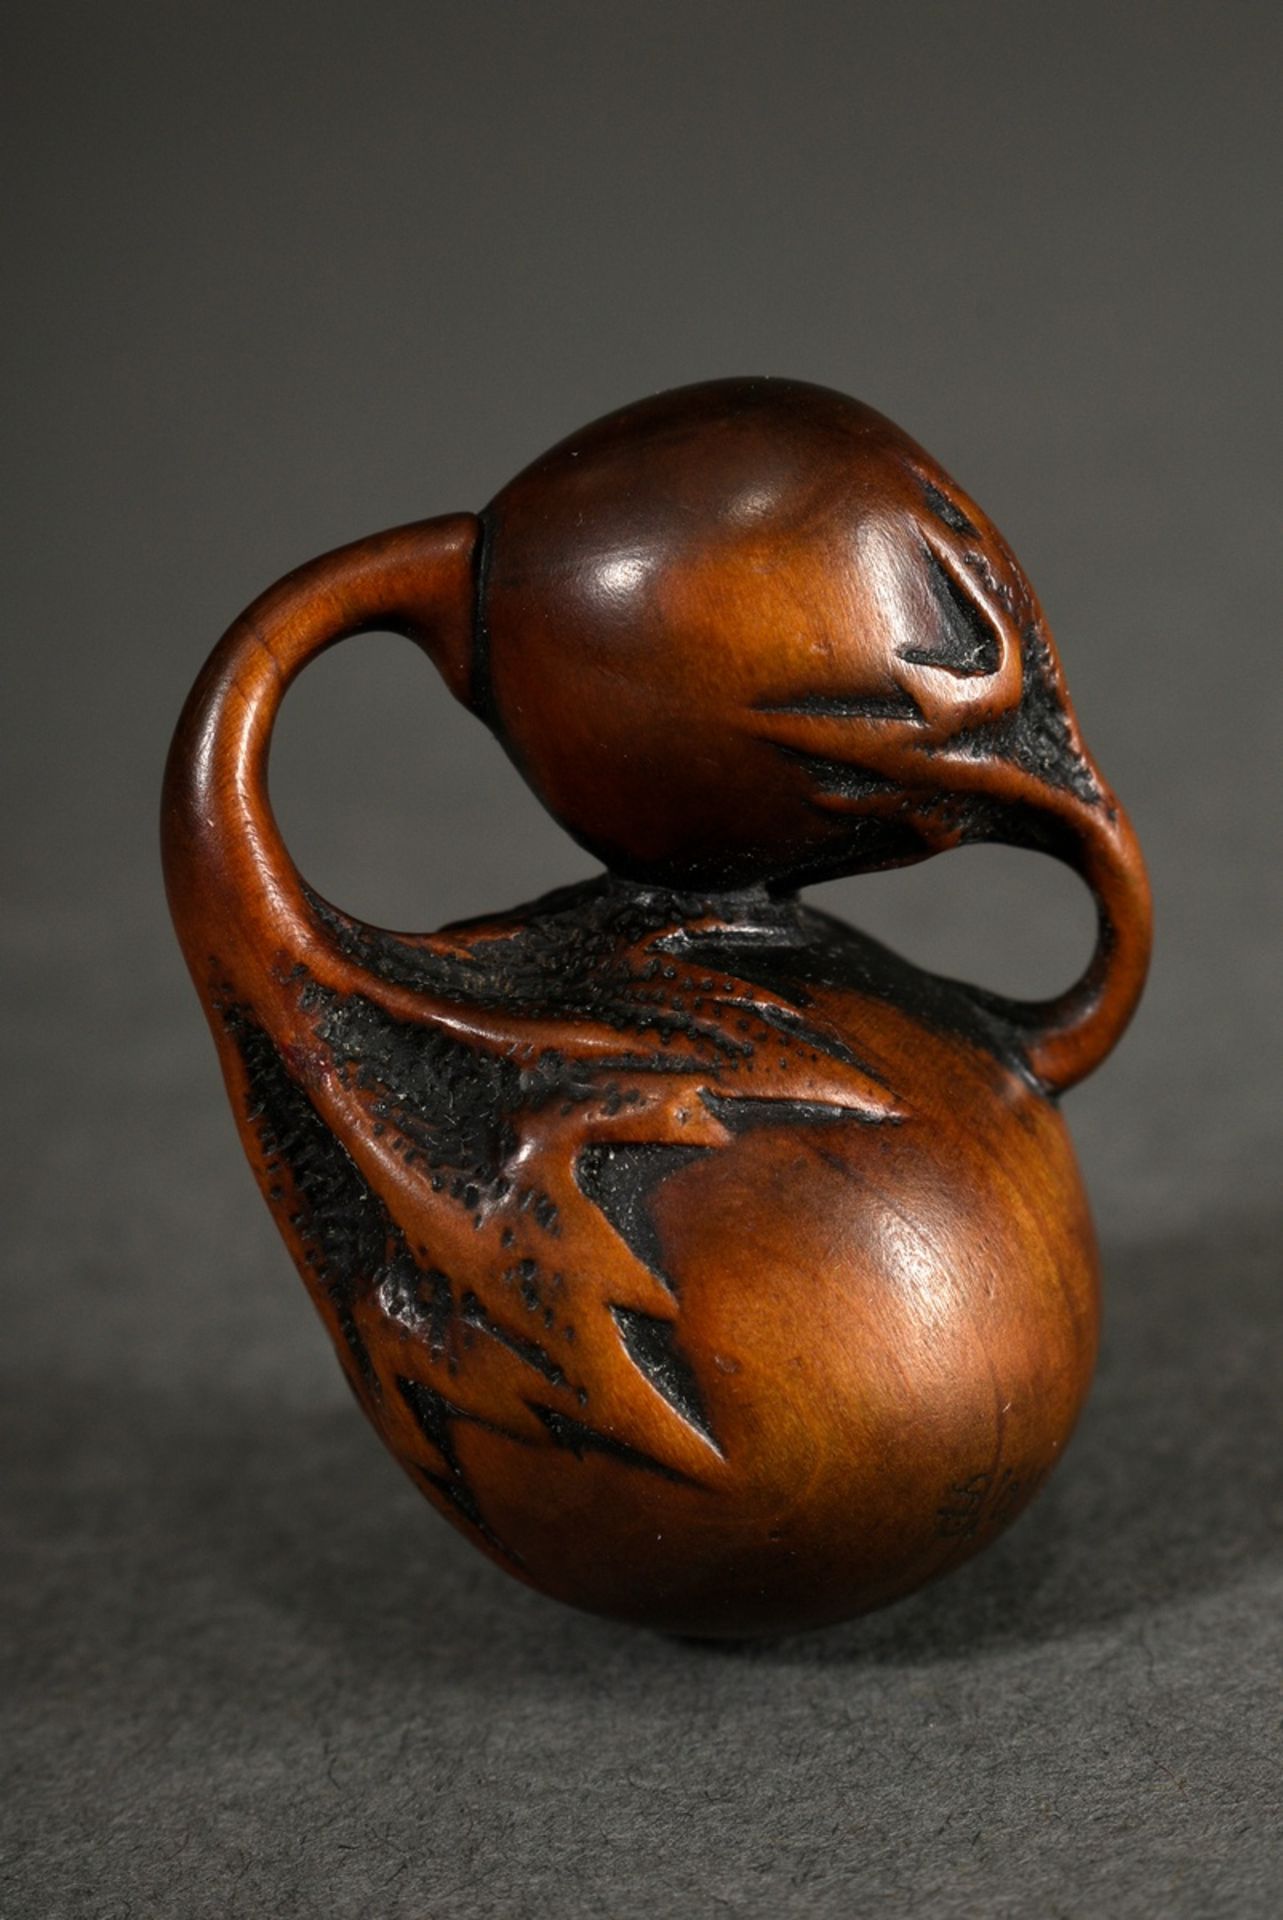 Boxwood netsuke "Small and large aubergine", with a wasp made of staghorn worked into the large aub - Image 2 of 5